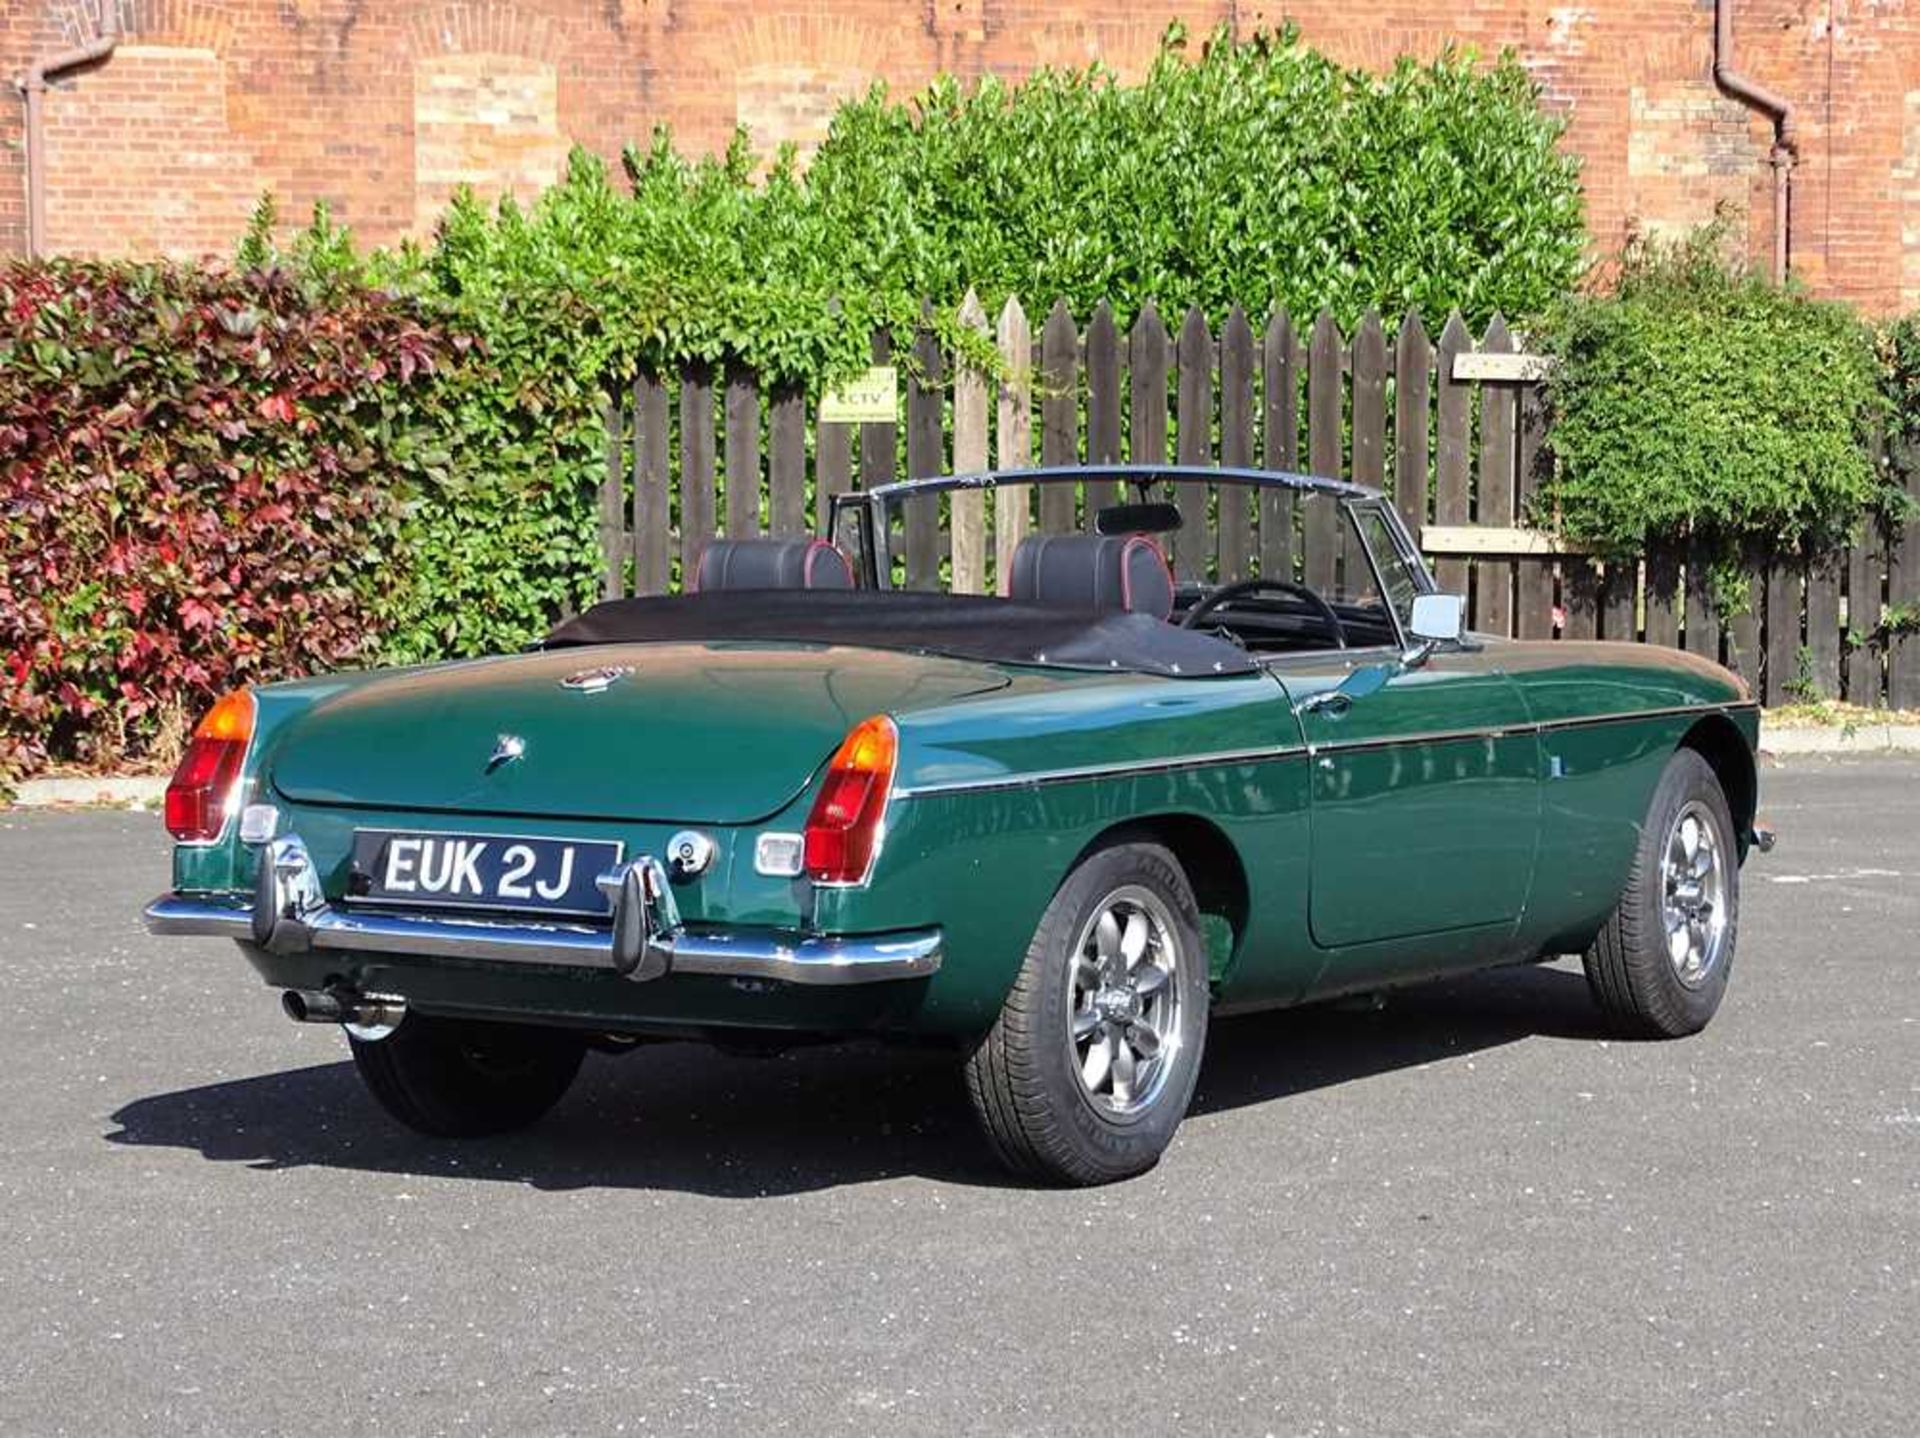 1971 MG B Roadster Restored at a cost of c.£33,000 - Image 14 of 43